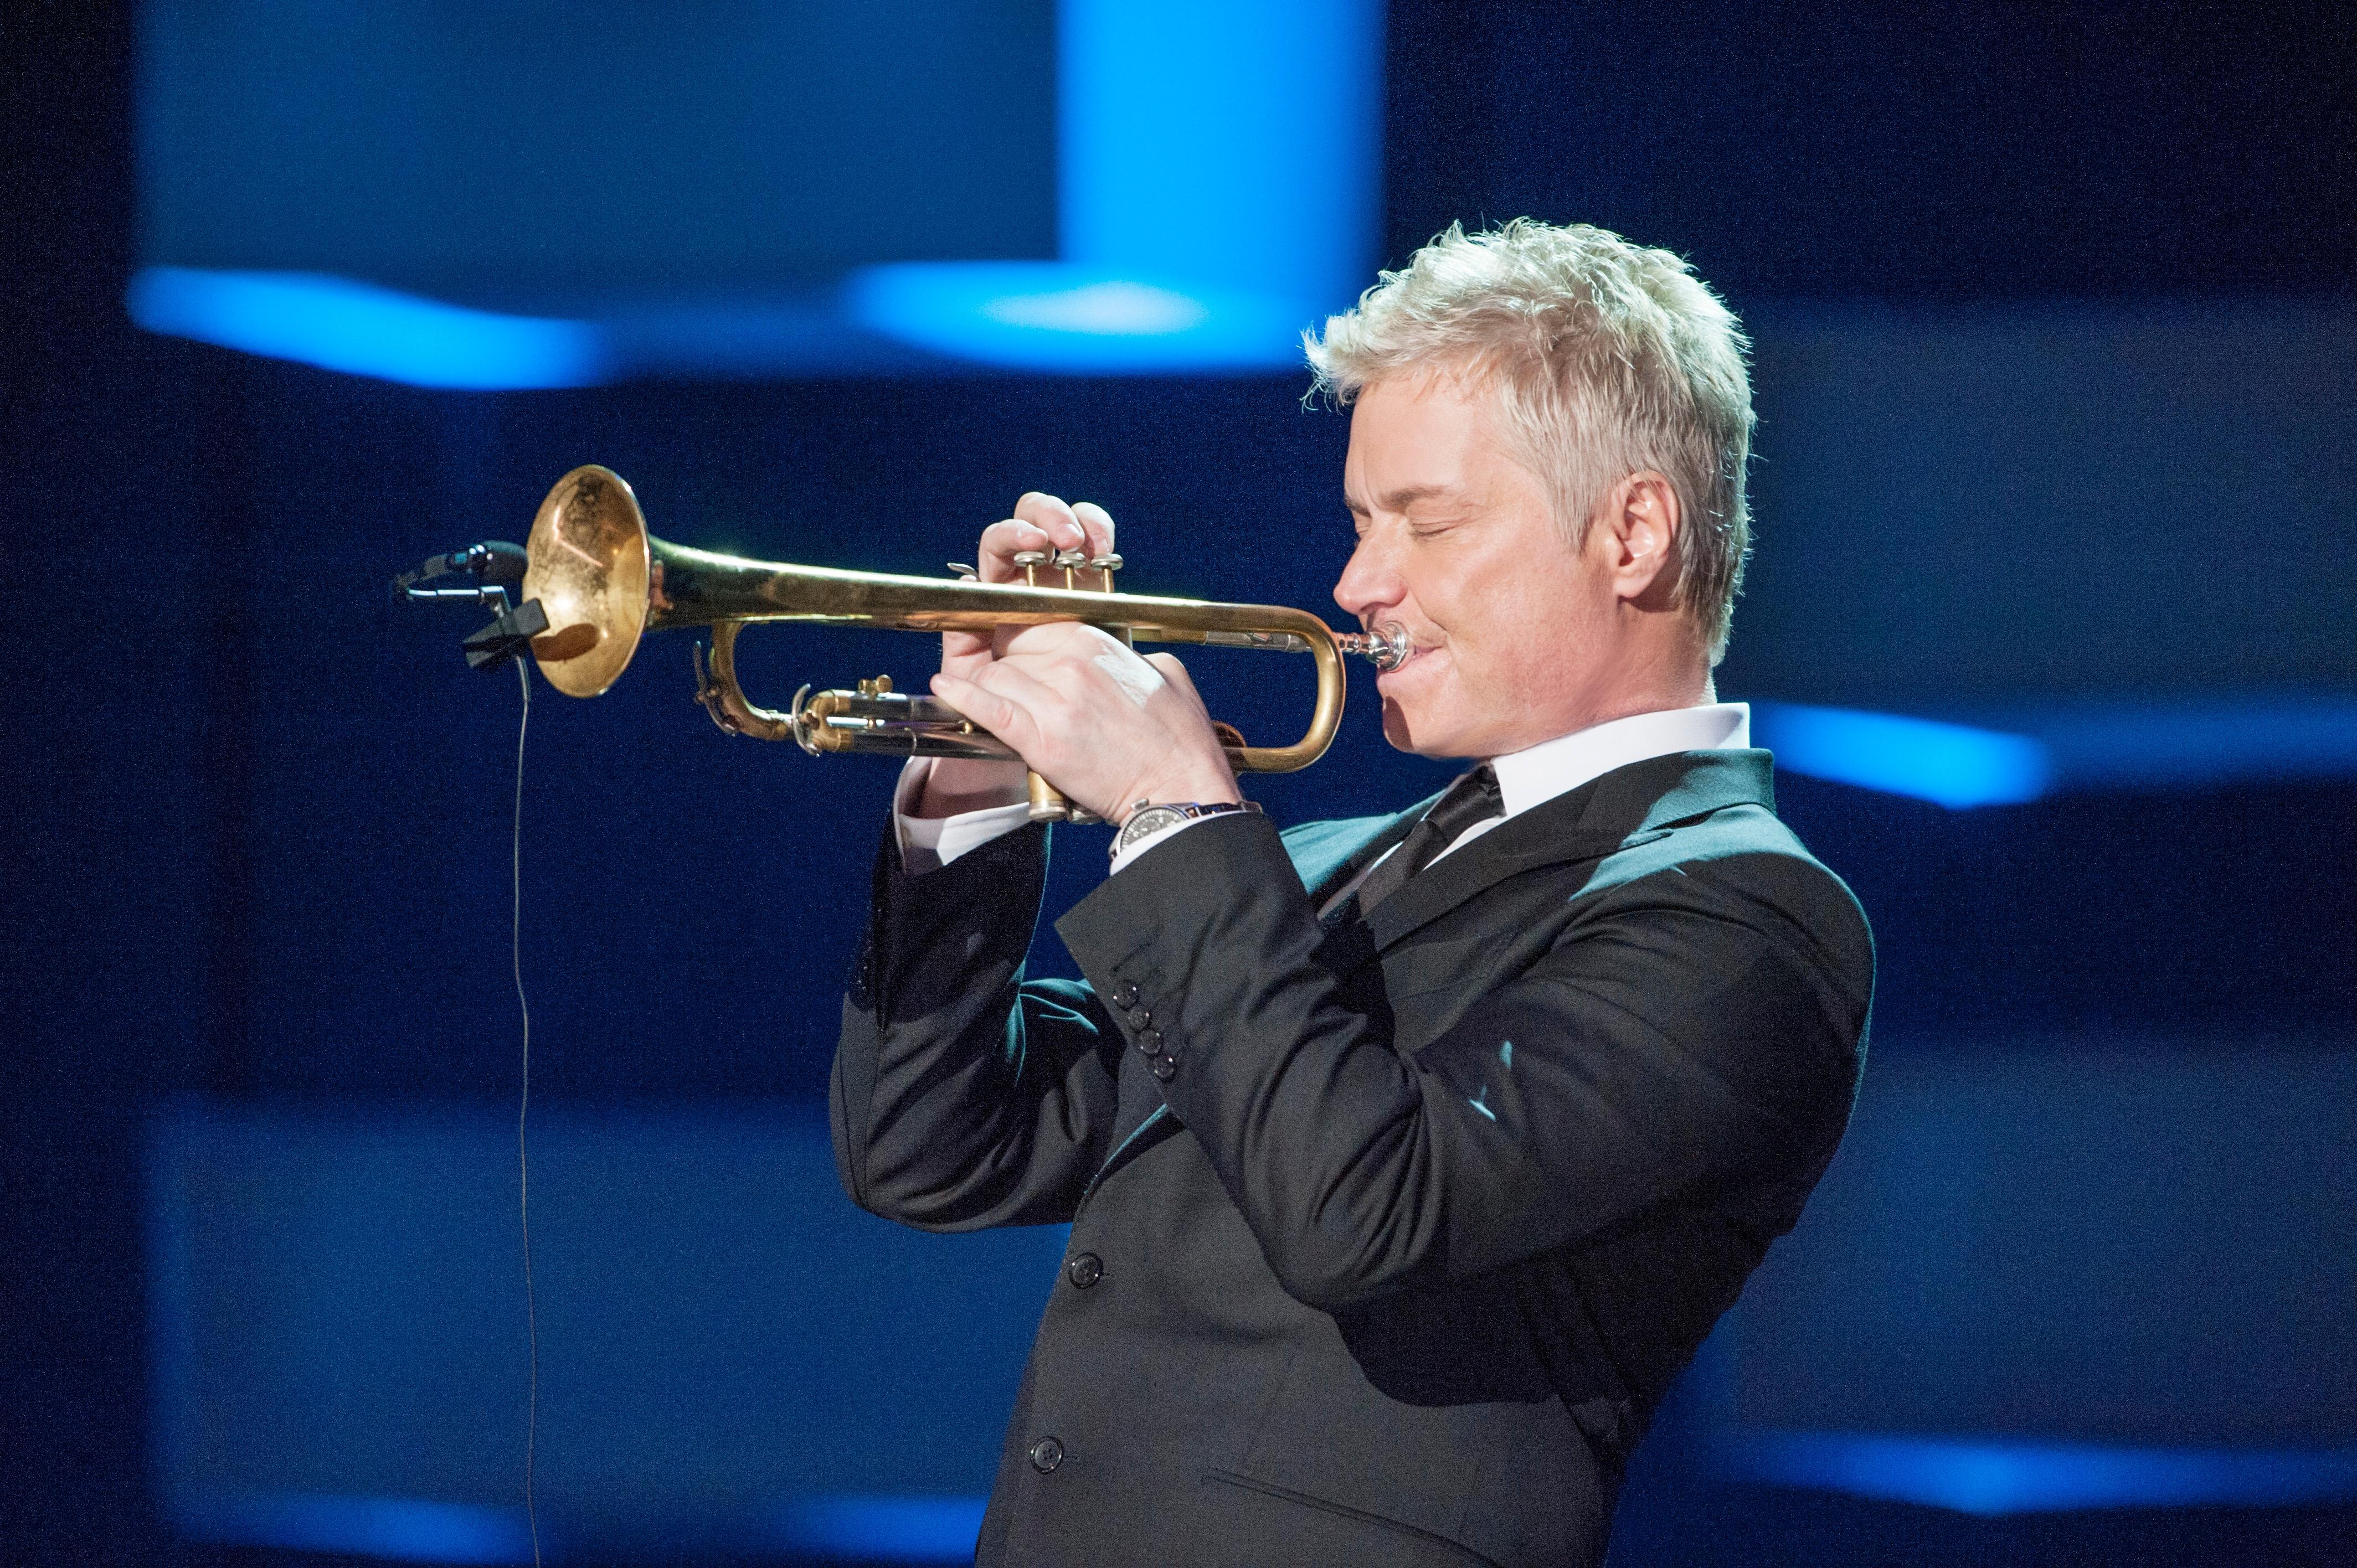 The Chris Botti Band in Concert